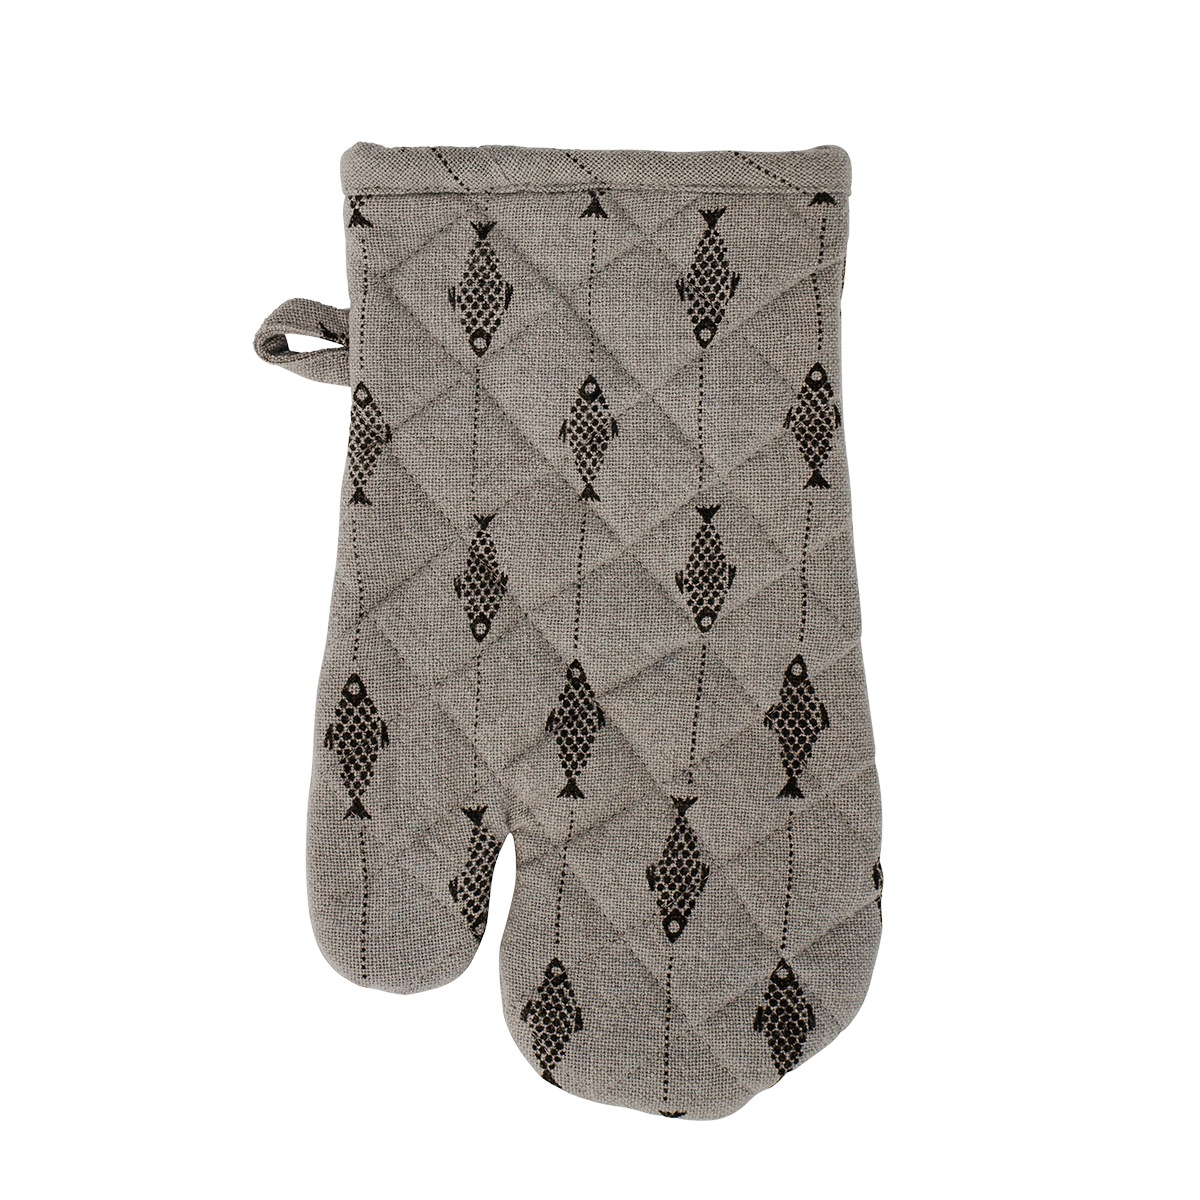 Quilted oven mitt, Grey